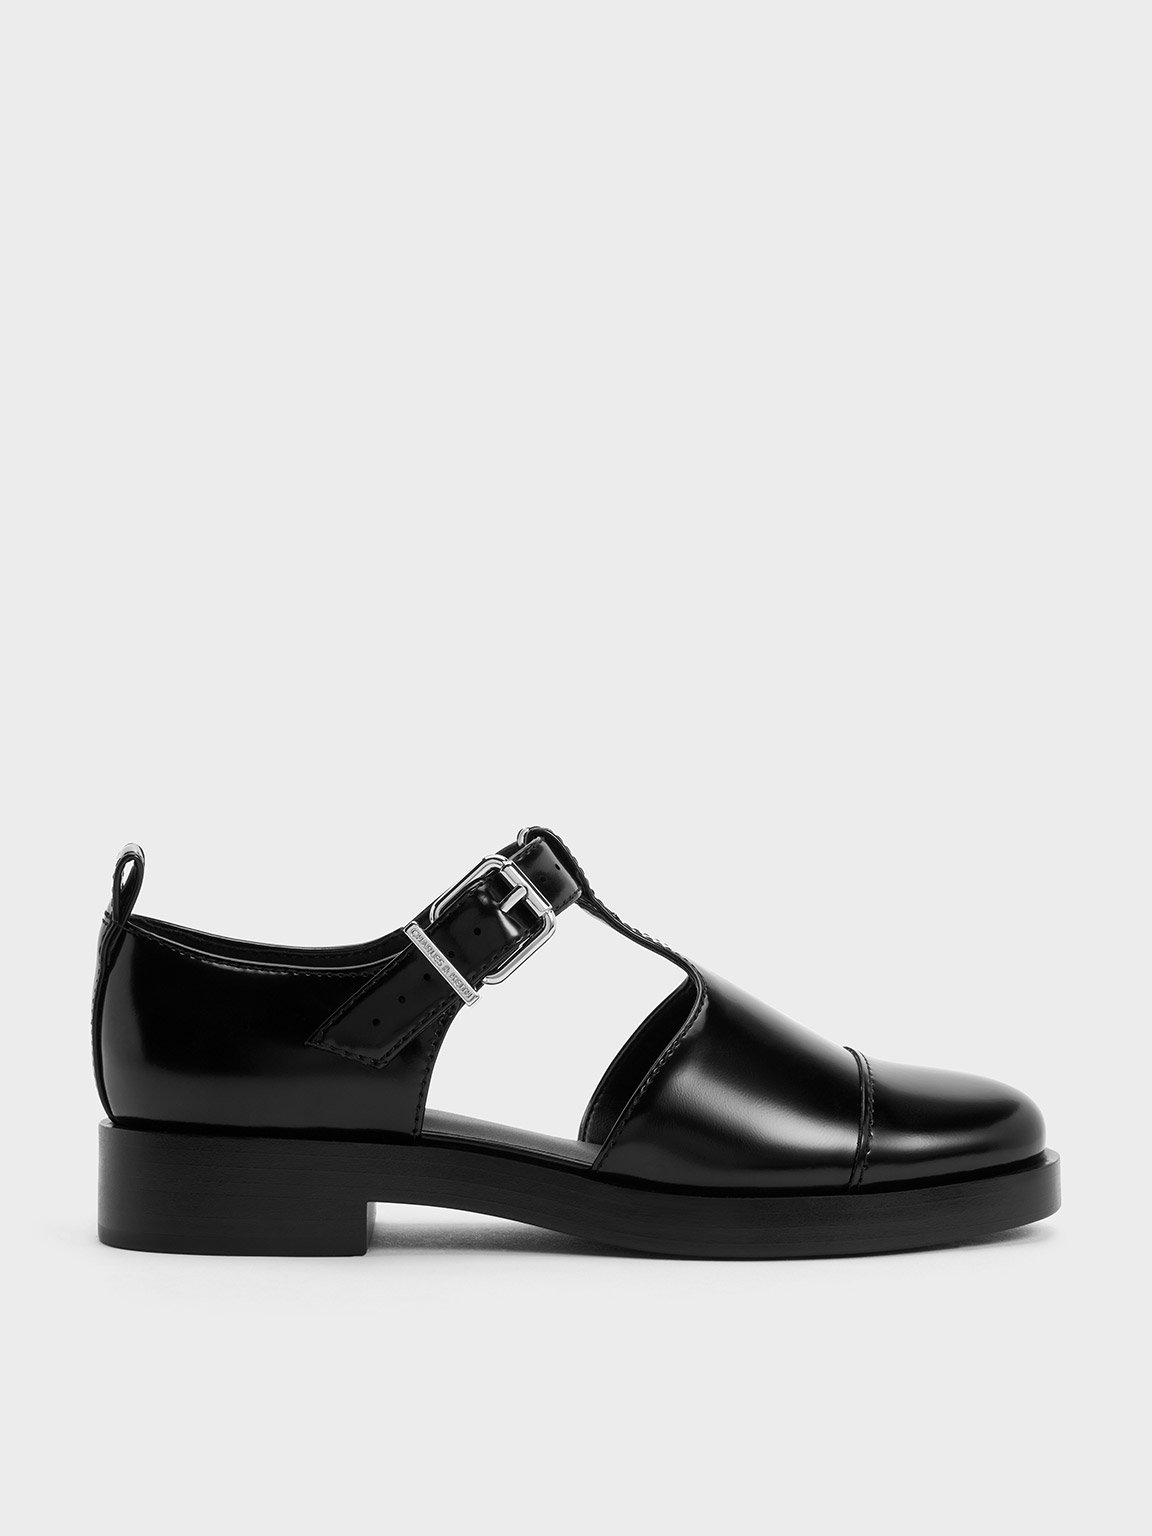 Black Box Charly T-Bar Buckled Sandals - CHARLES & KEITH SG